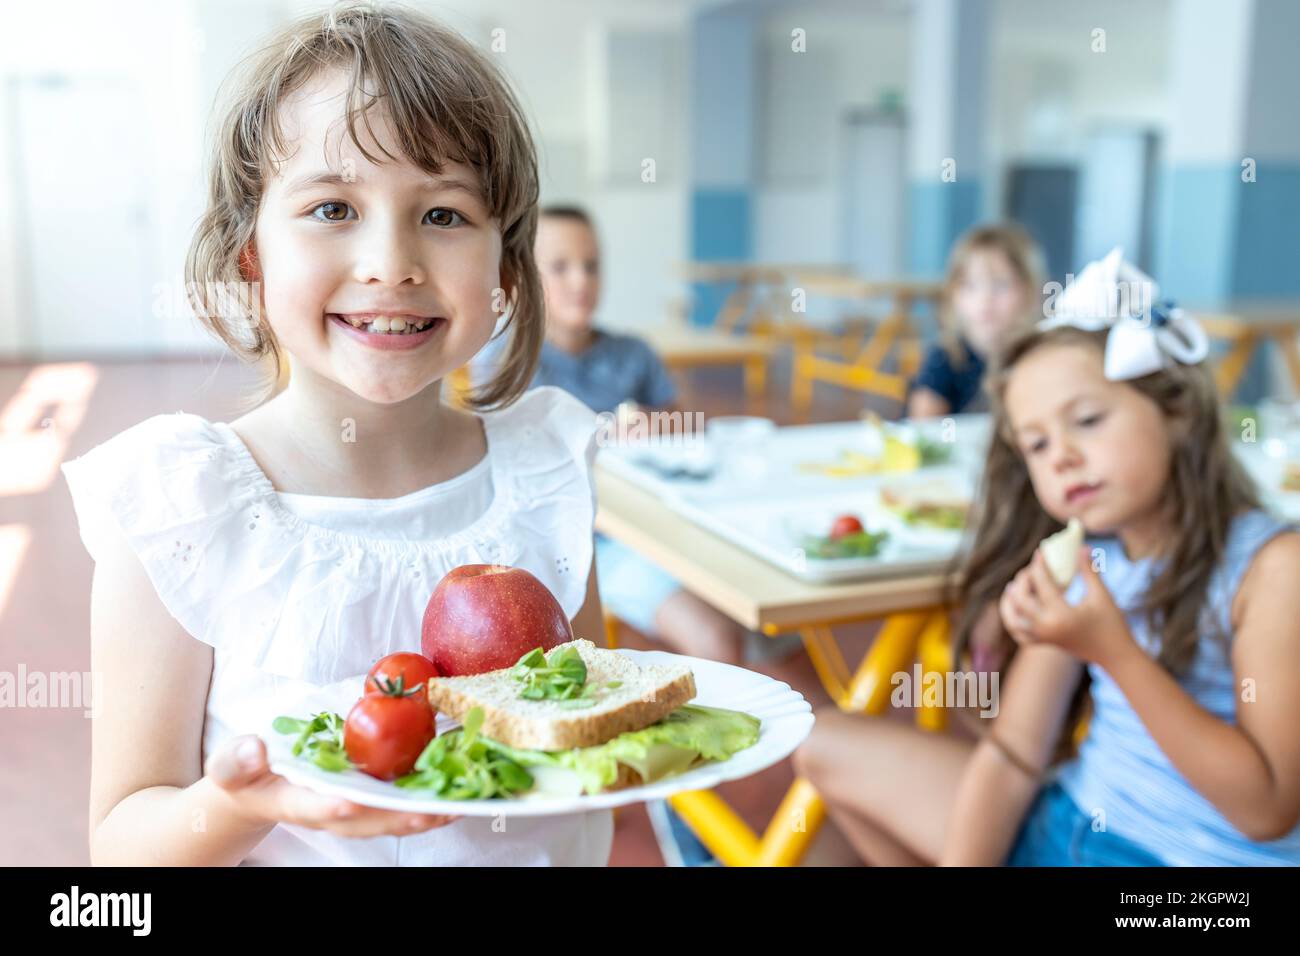 Smiling student holding healthy meal on plate standing at cafeteria Stock Photo